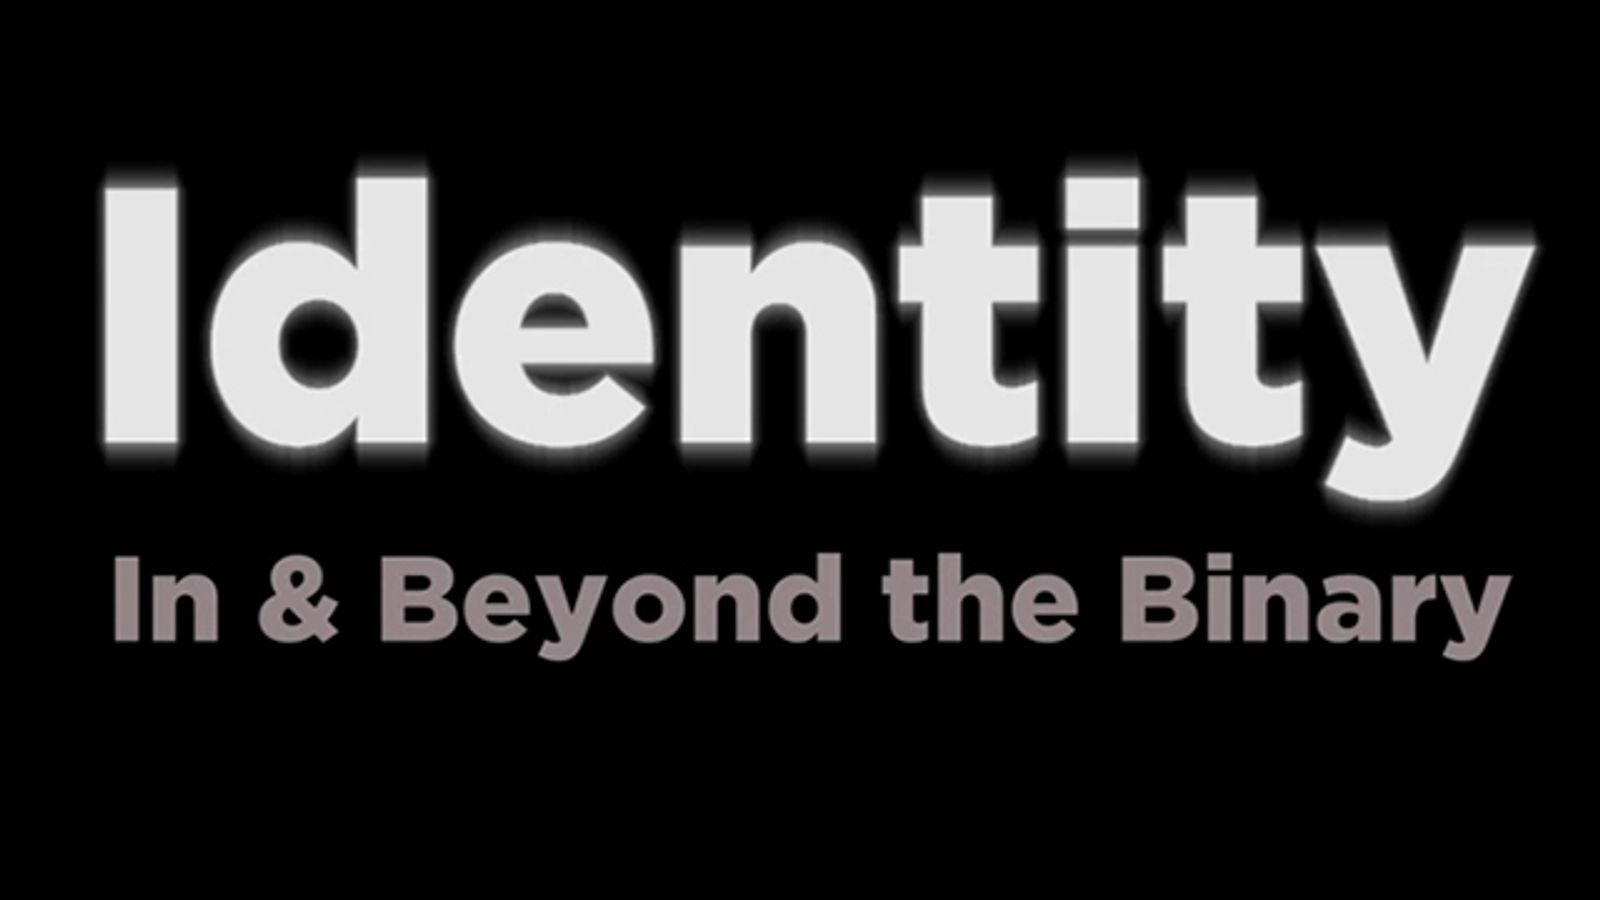 Dave Naz's 'Identity: In & Beyond The Binary' Posted on YouTube